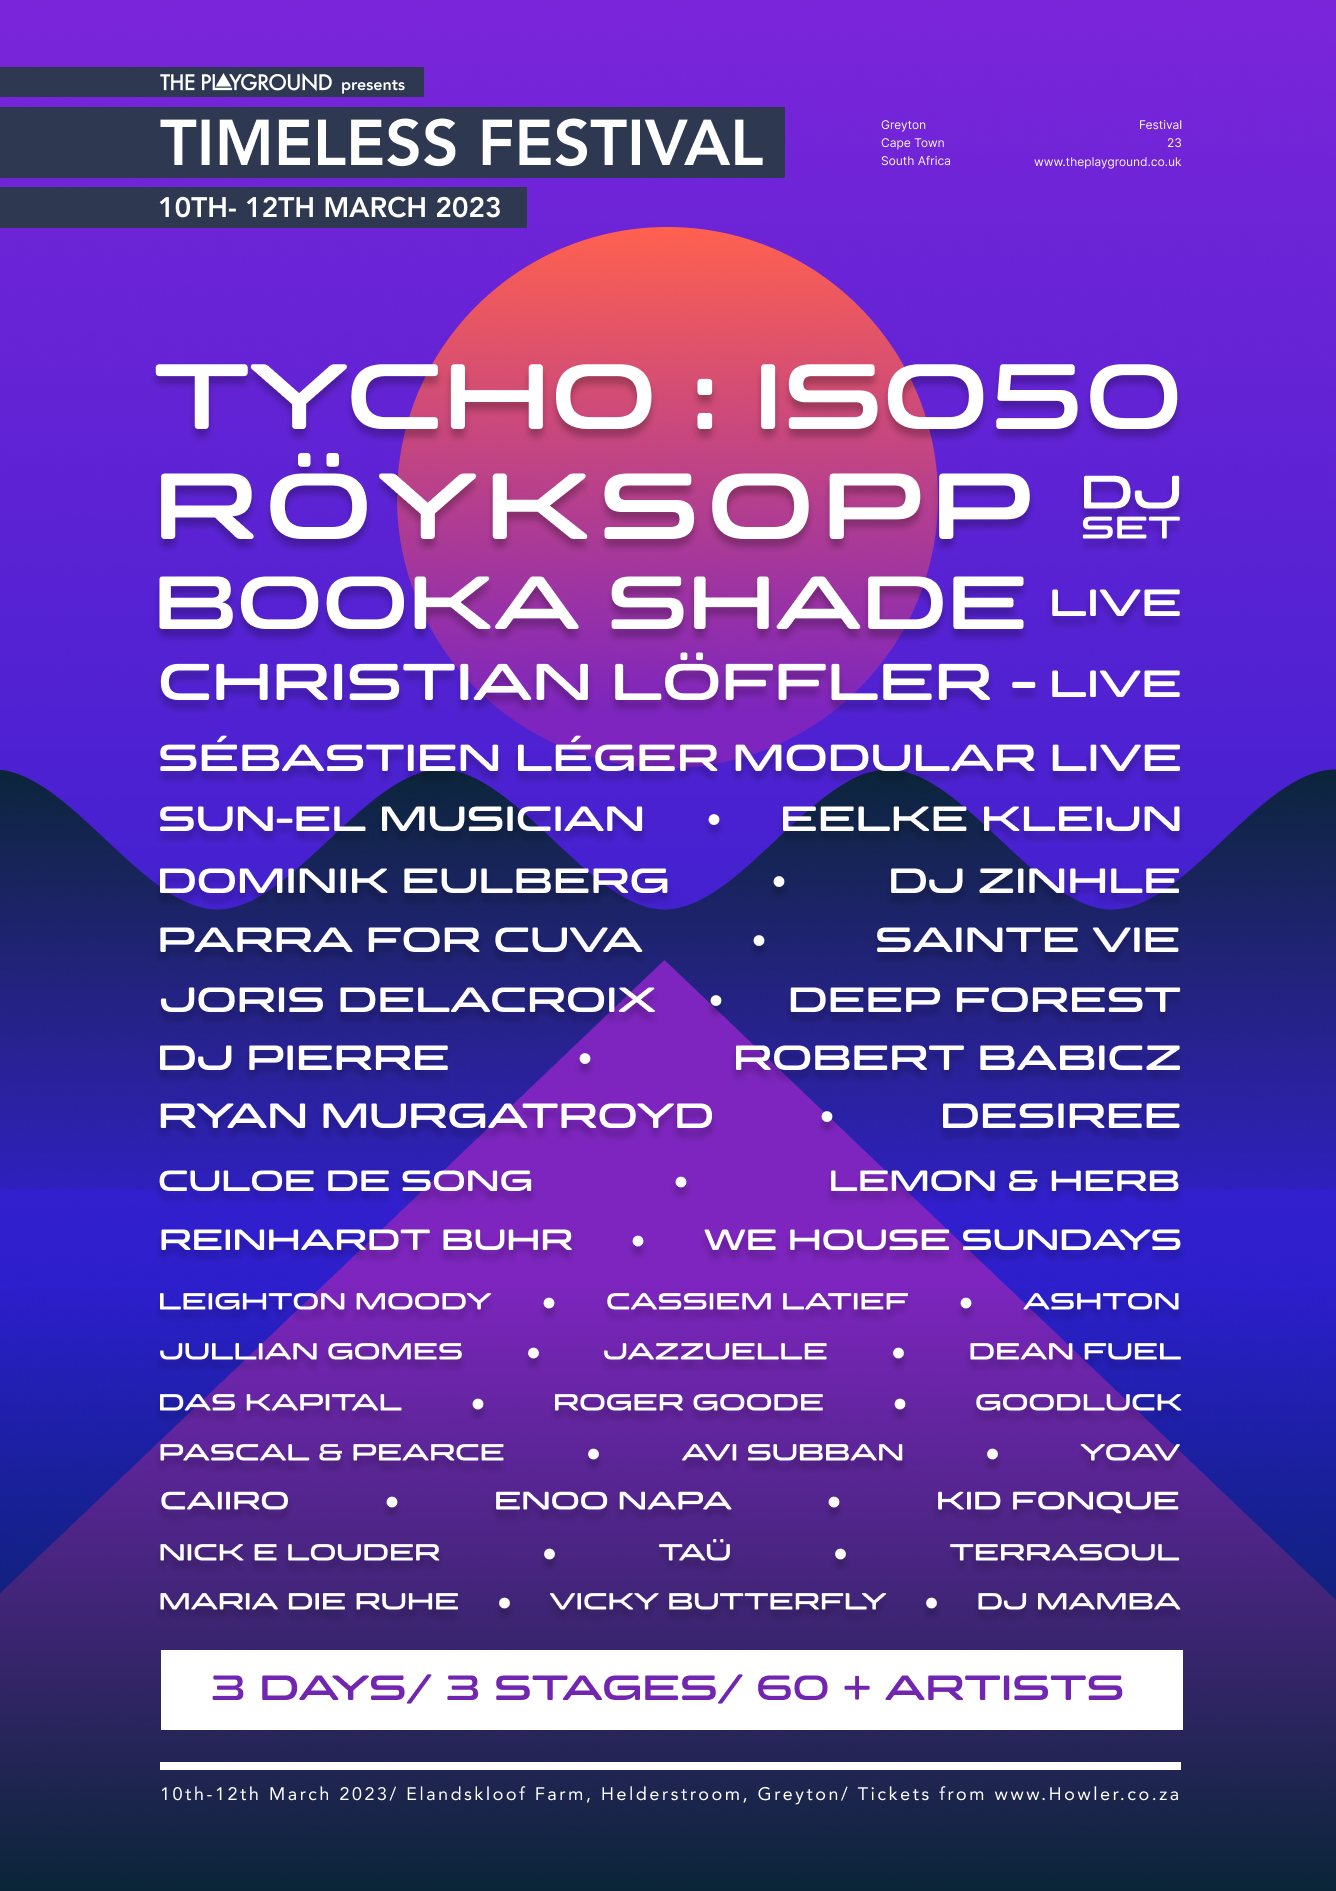 THE PLAYGROUND presents TIMELESS Festival - フライヤー表